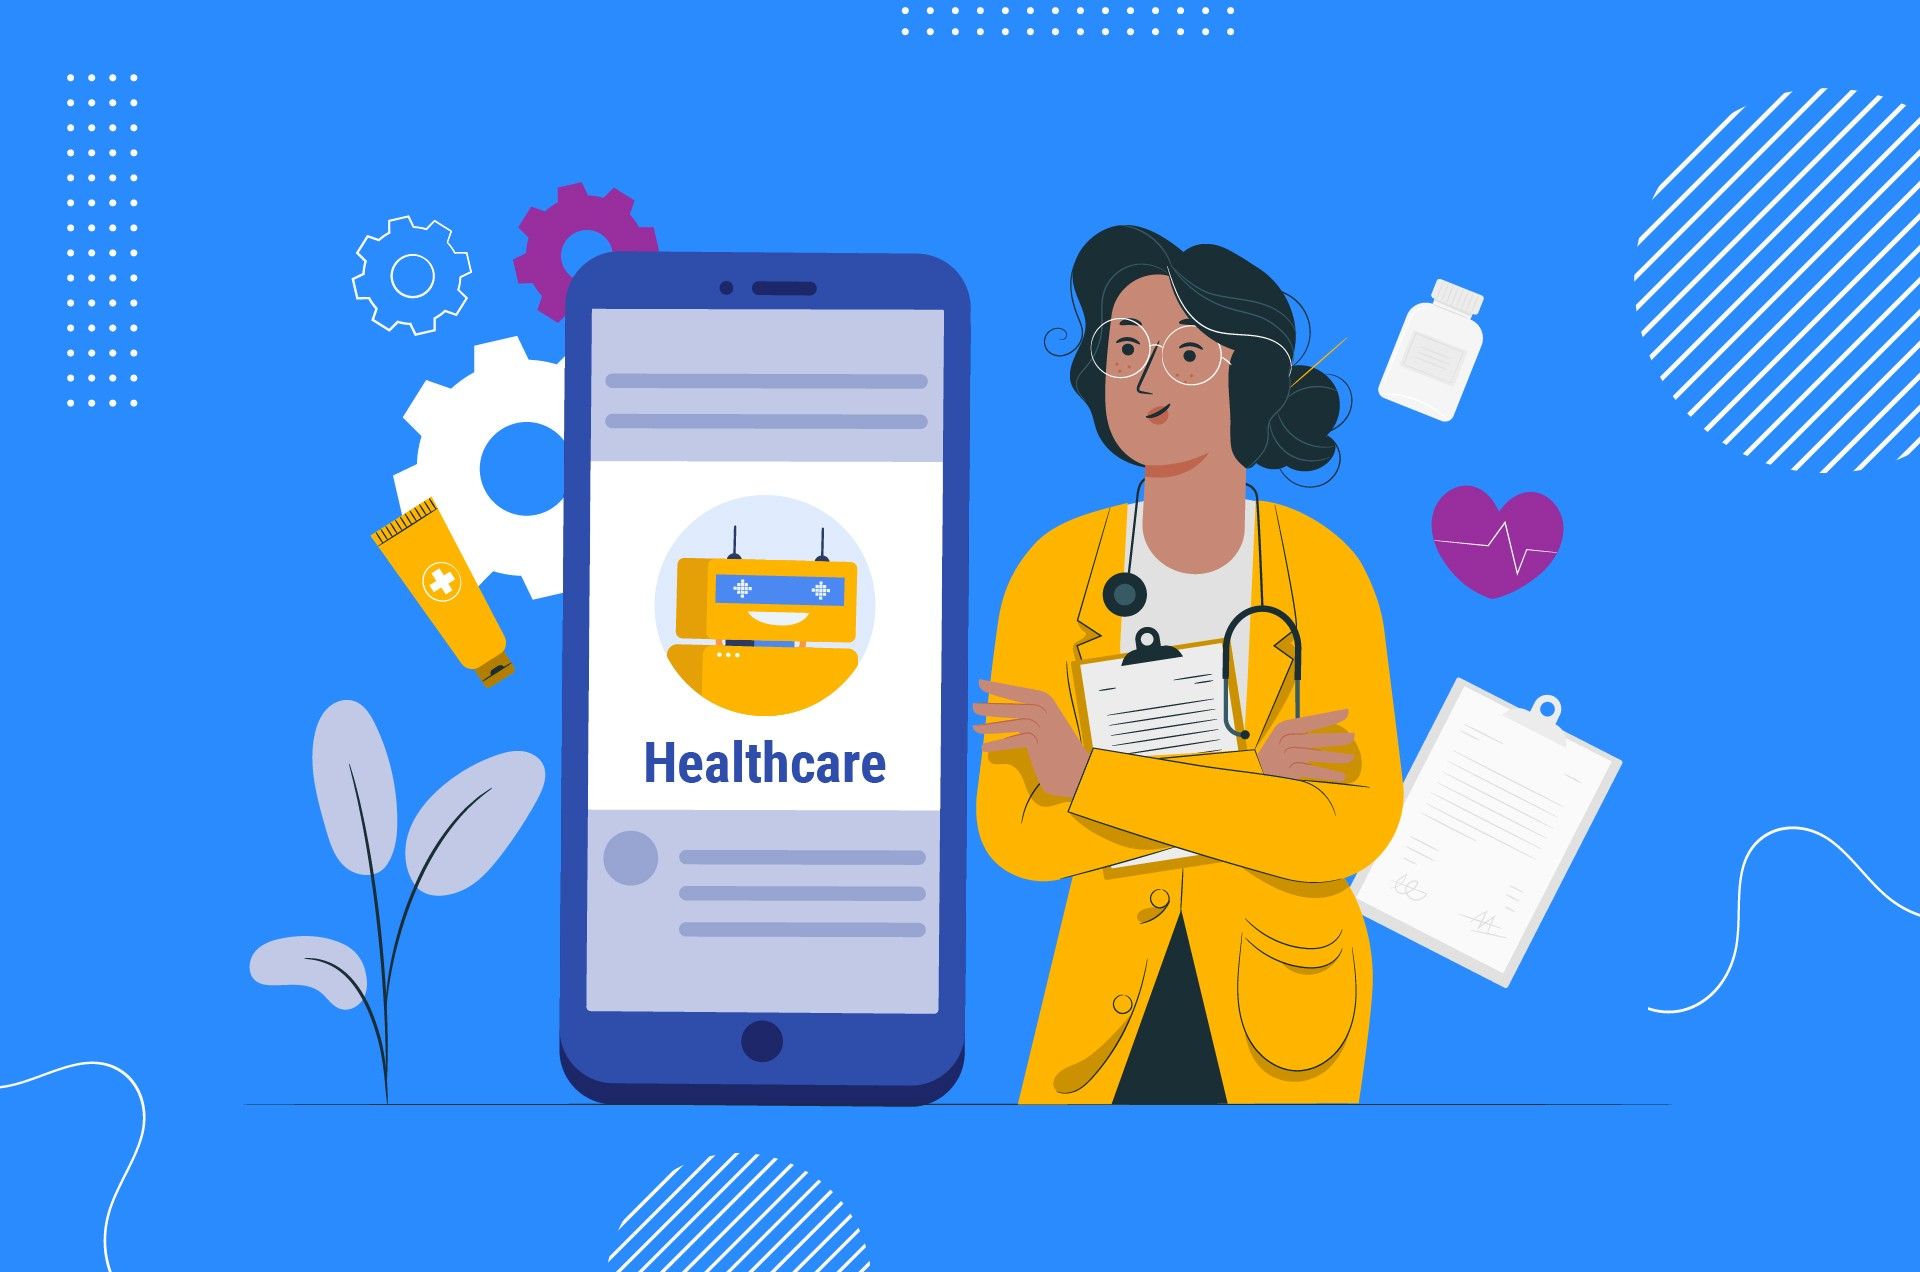 chatbots in healthcare